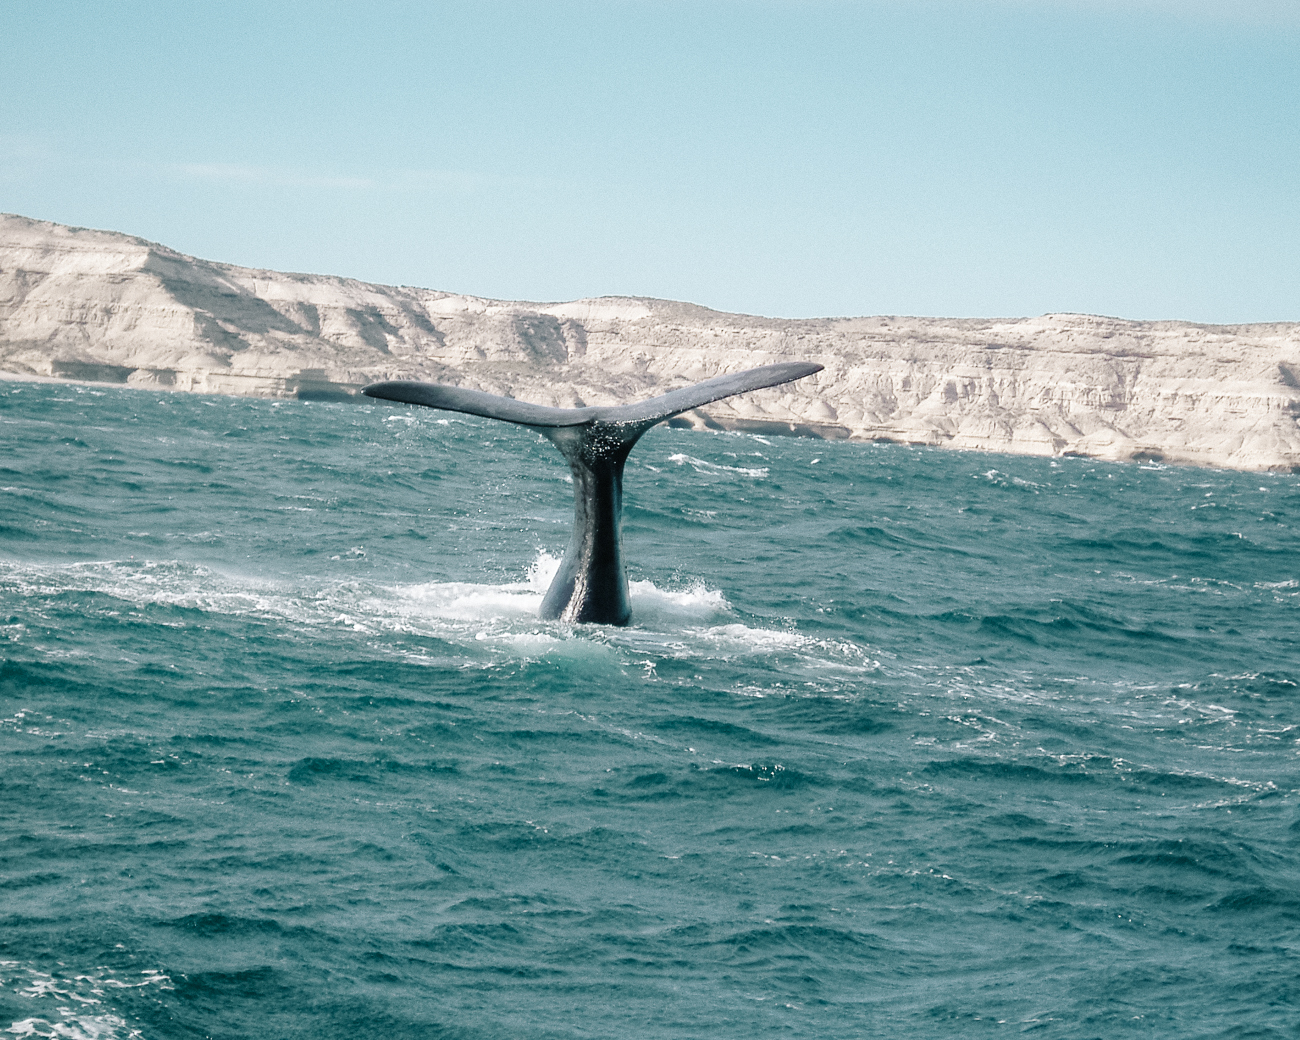 Discover amazing sea life in Puerto Madryn, Argentina